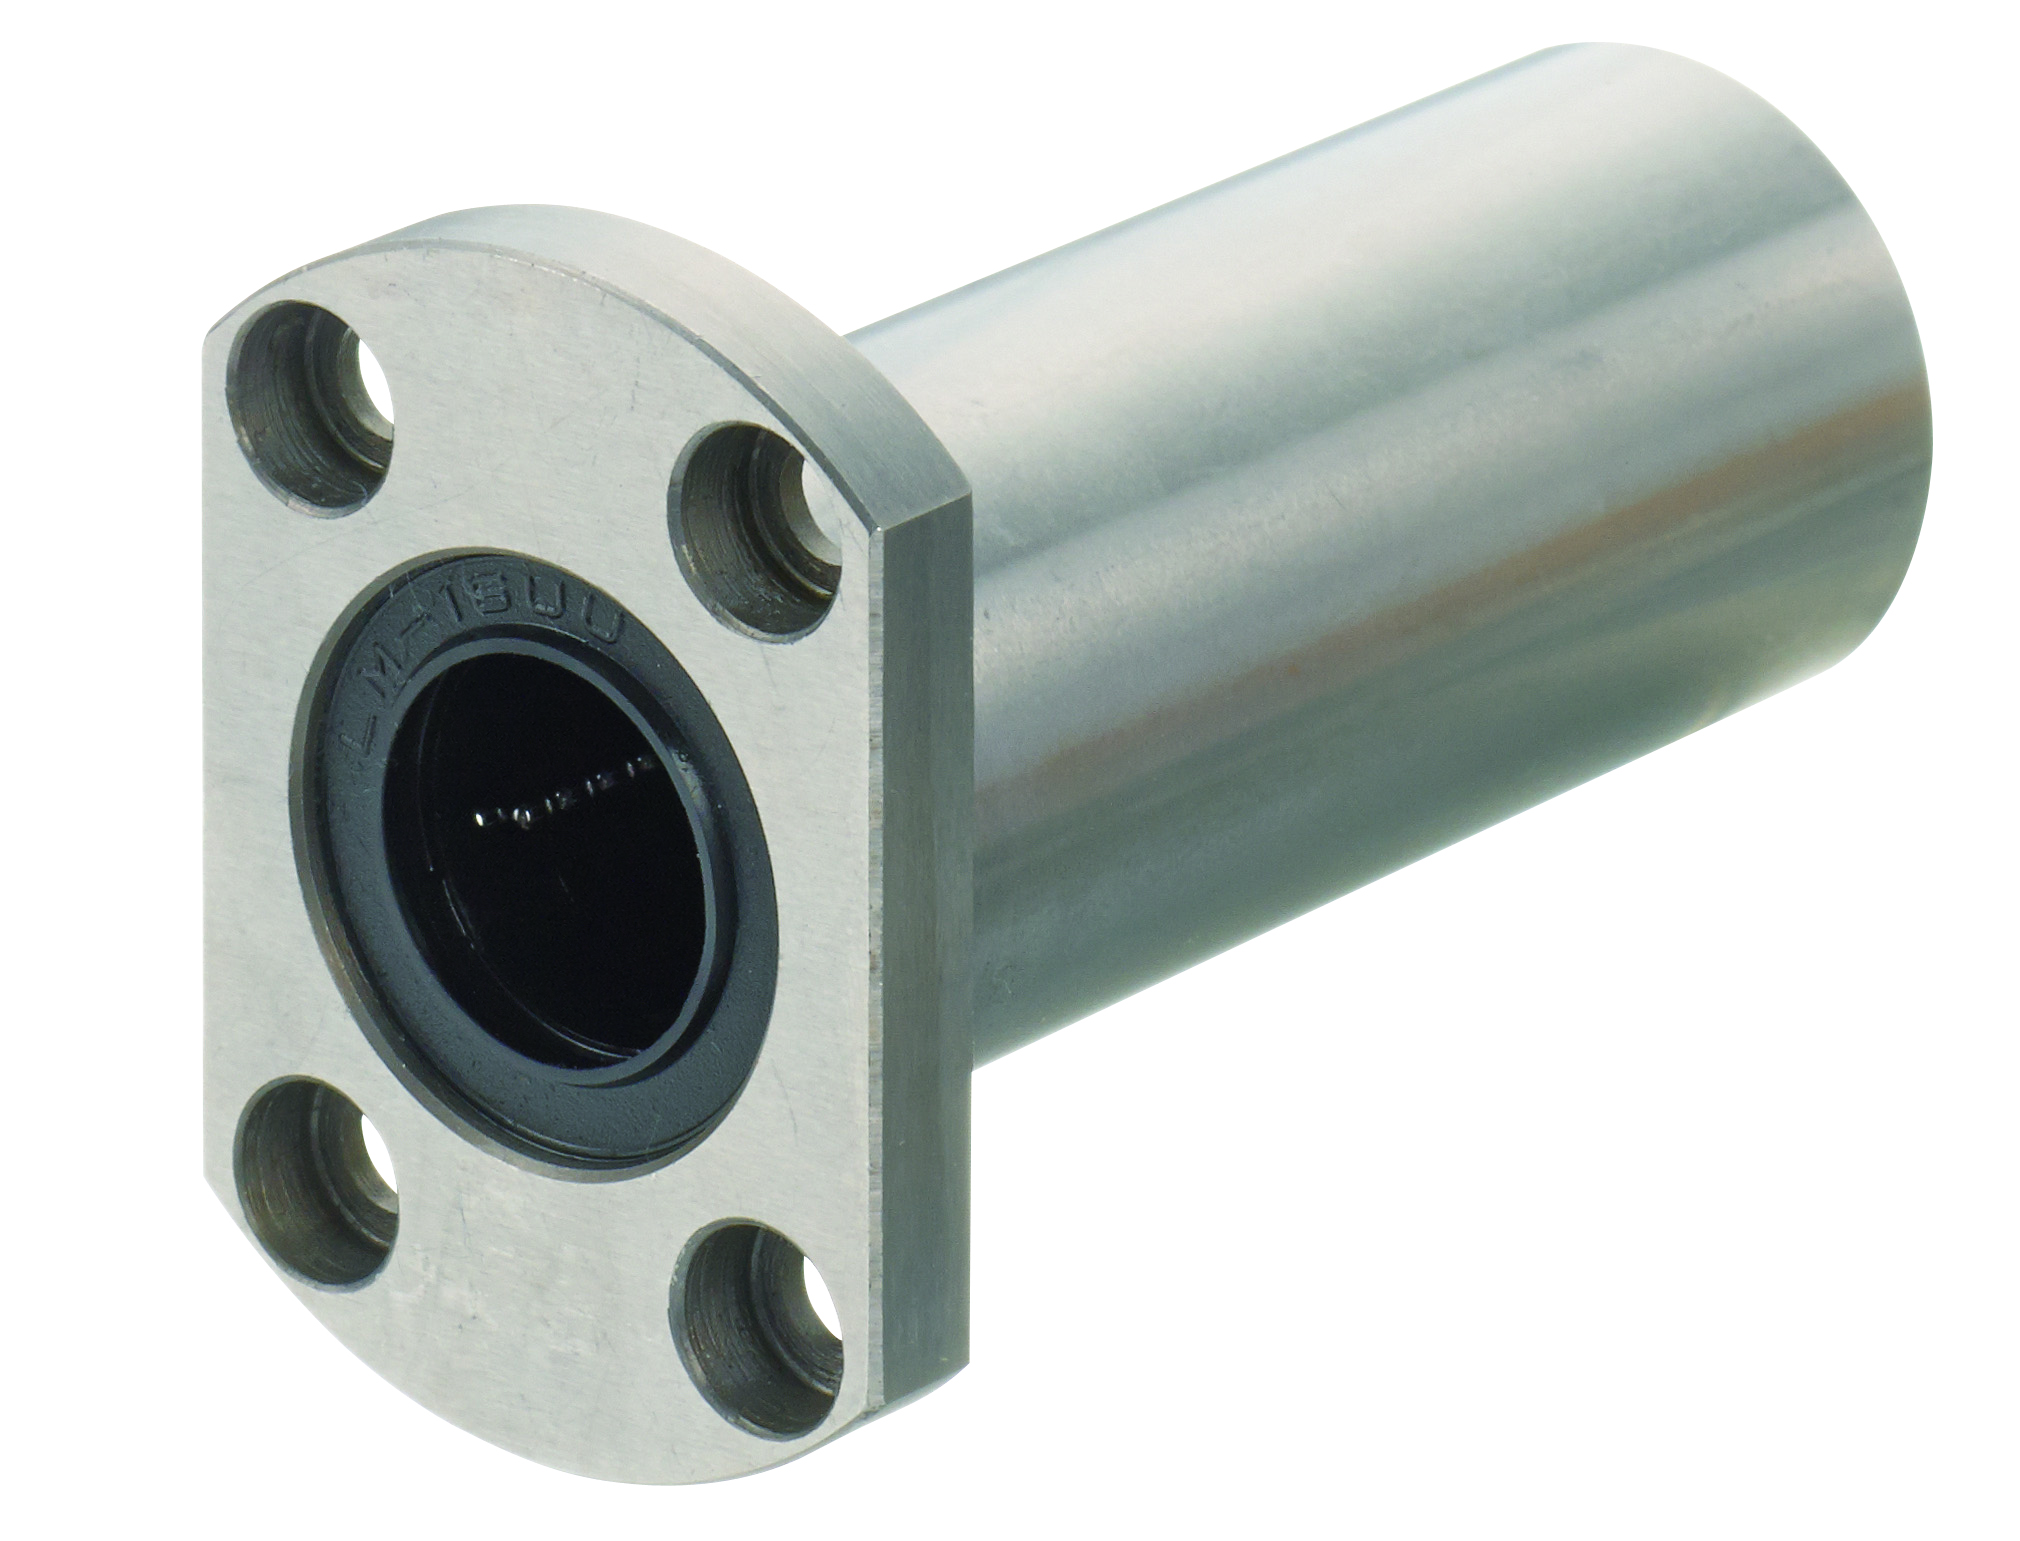 Flanged Linear Bushing - Standard, Double[RoHS Compliant]